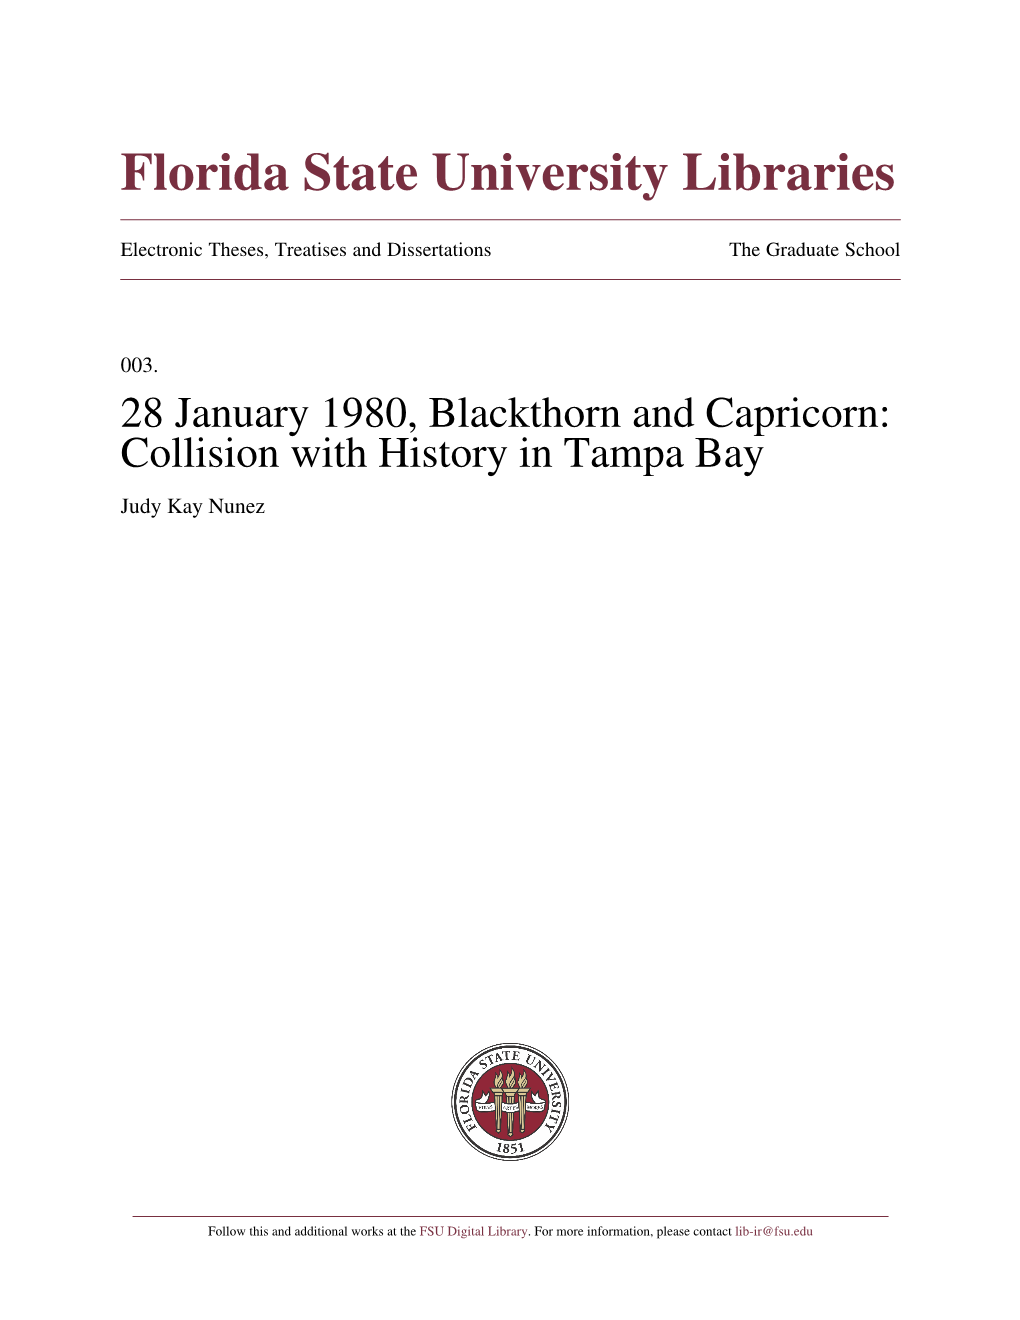 28 January 1980, Blackthorn and Capricorn: Collision with History in Tampa Bay Judy Kay Nunez